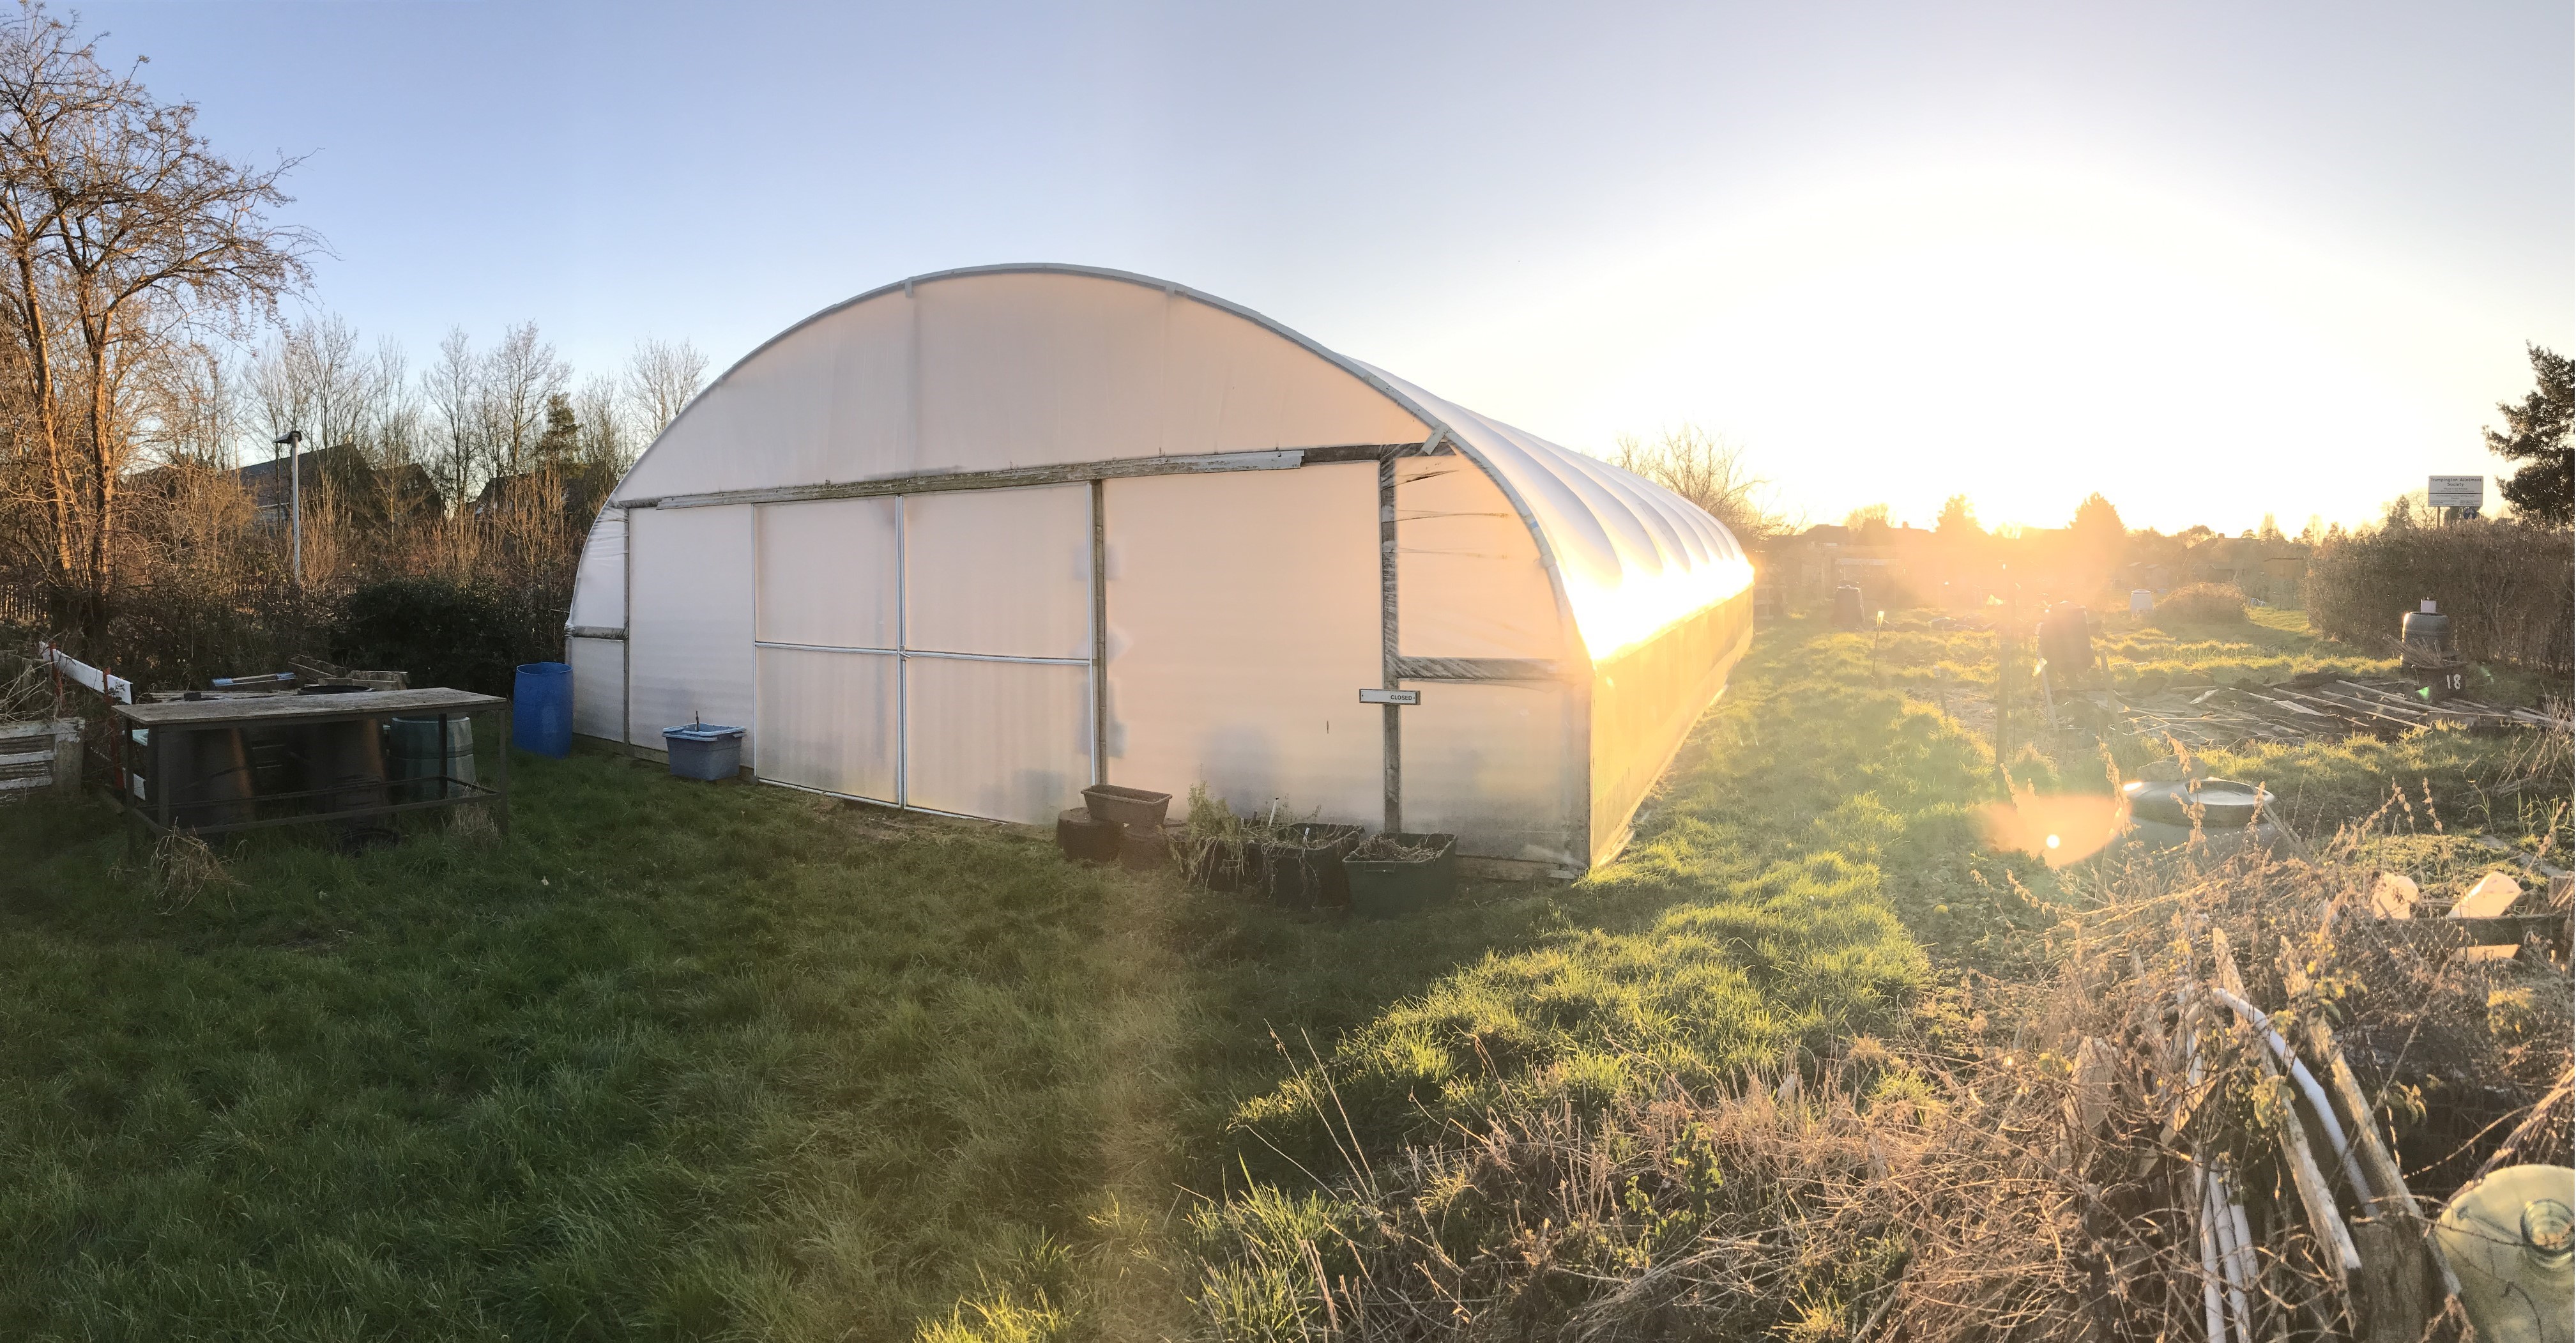 <h2>Community polytunnel</h2><div class='slide-content'><p><span class='highlight'>Grow aubergine, tomatillo, melons and more on a covered plot</span></p><p><span class='highlight'>Raise seedlings and extend your growing season with winter crops</span></p></div><a href='/polytunnel-plots/' class='btn' title='Read more'>Read more</a>